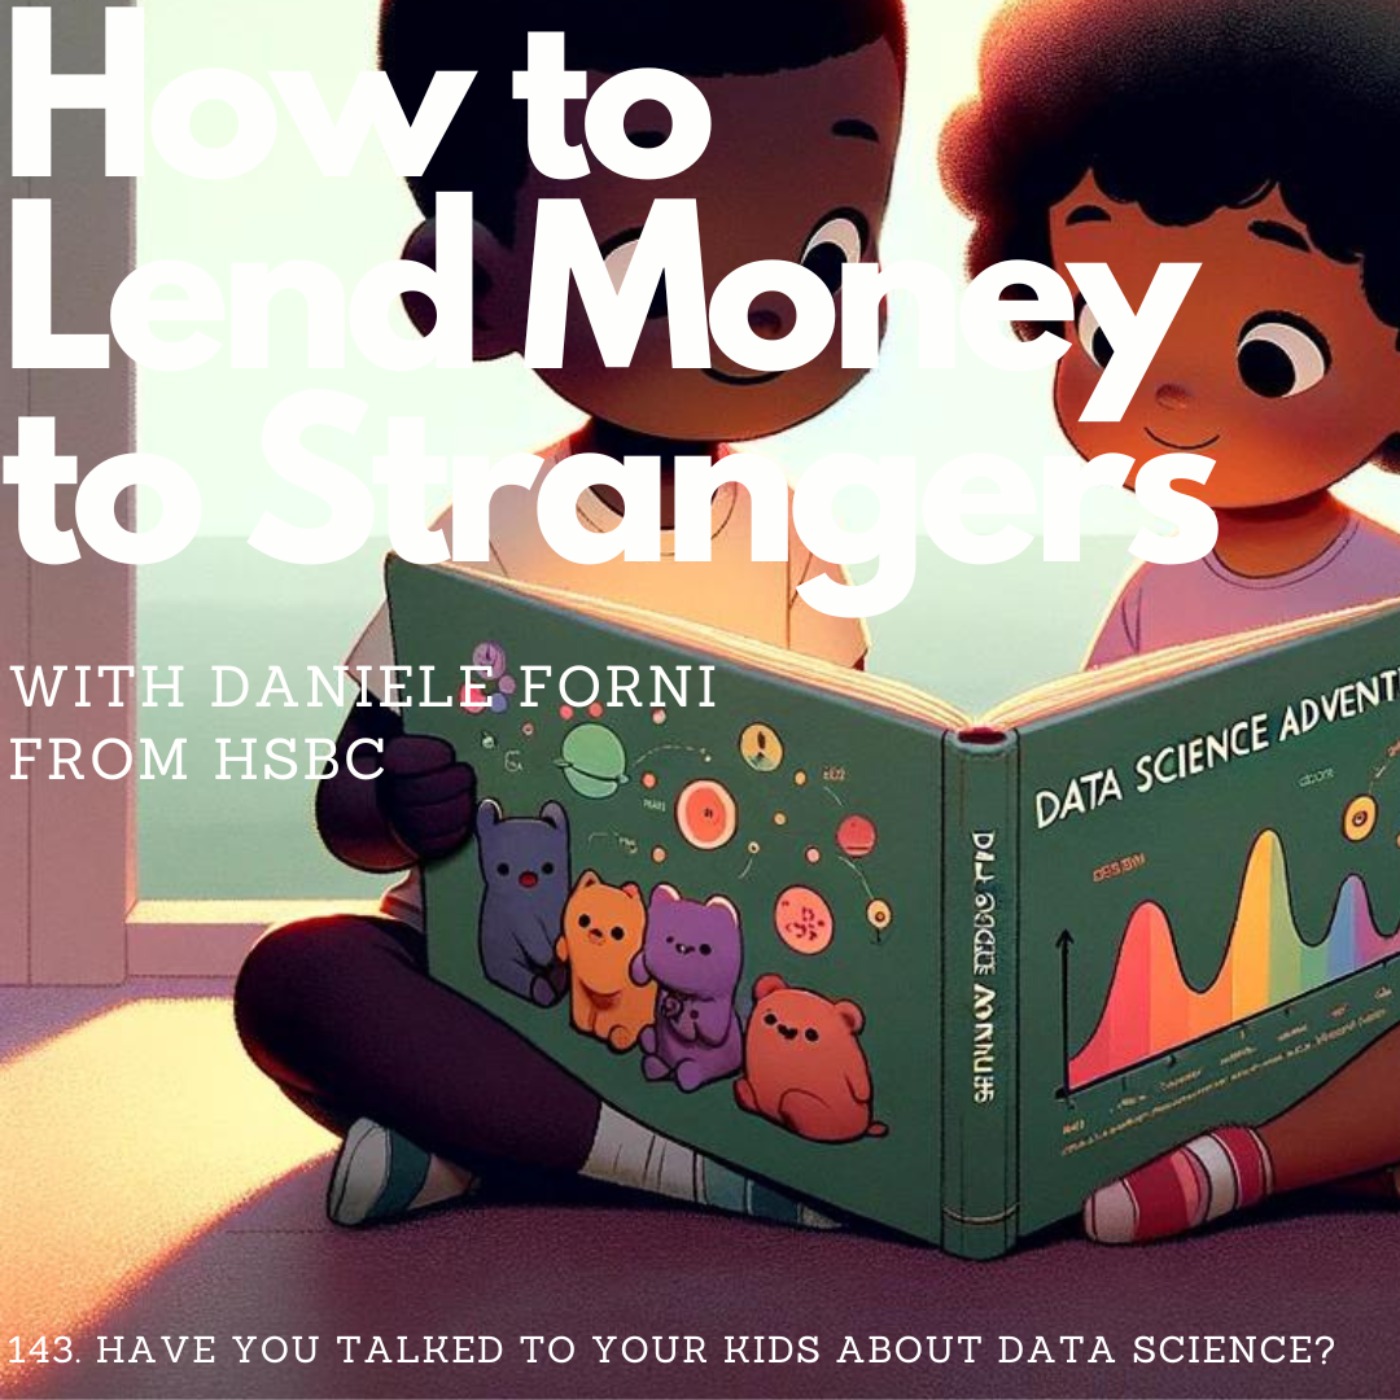 Have you talked to your kids about data science? With Daniele Forni (HSBC)